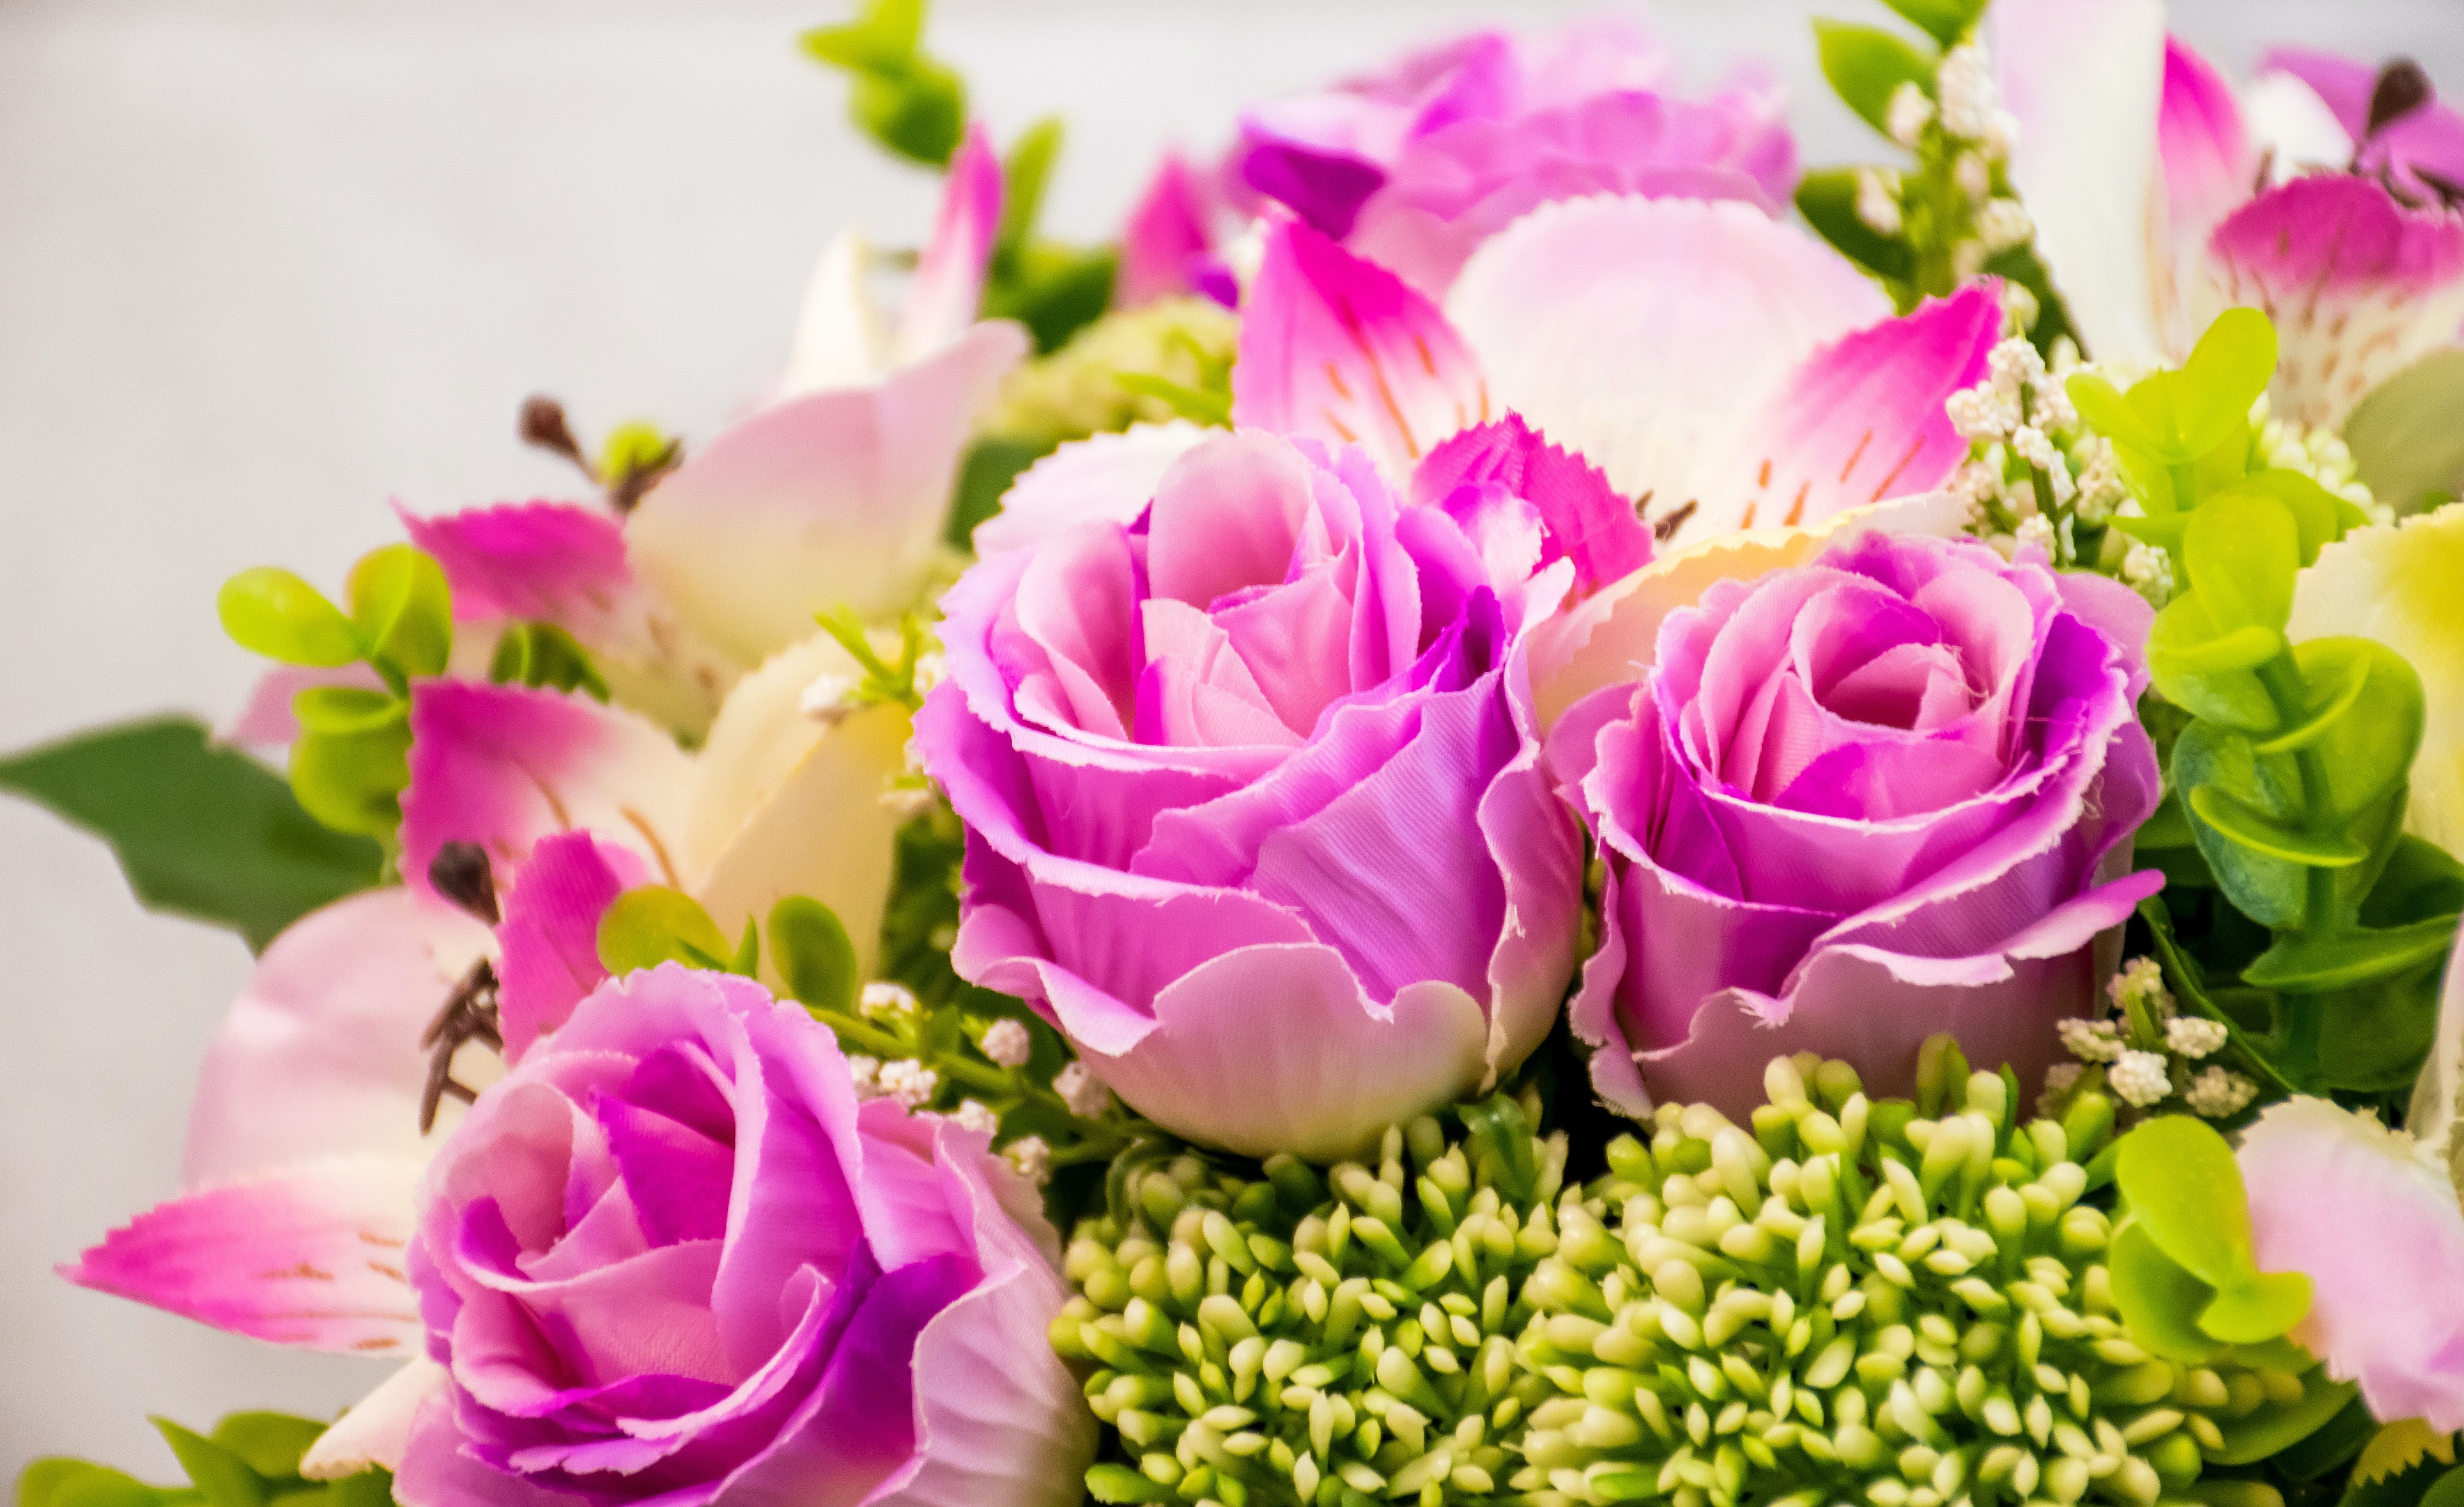 6000x3670 Pink and Green Potted Flowers · Free Stock Photo on WallpaperBat